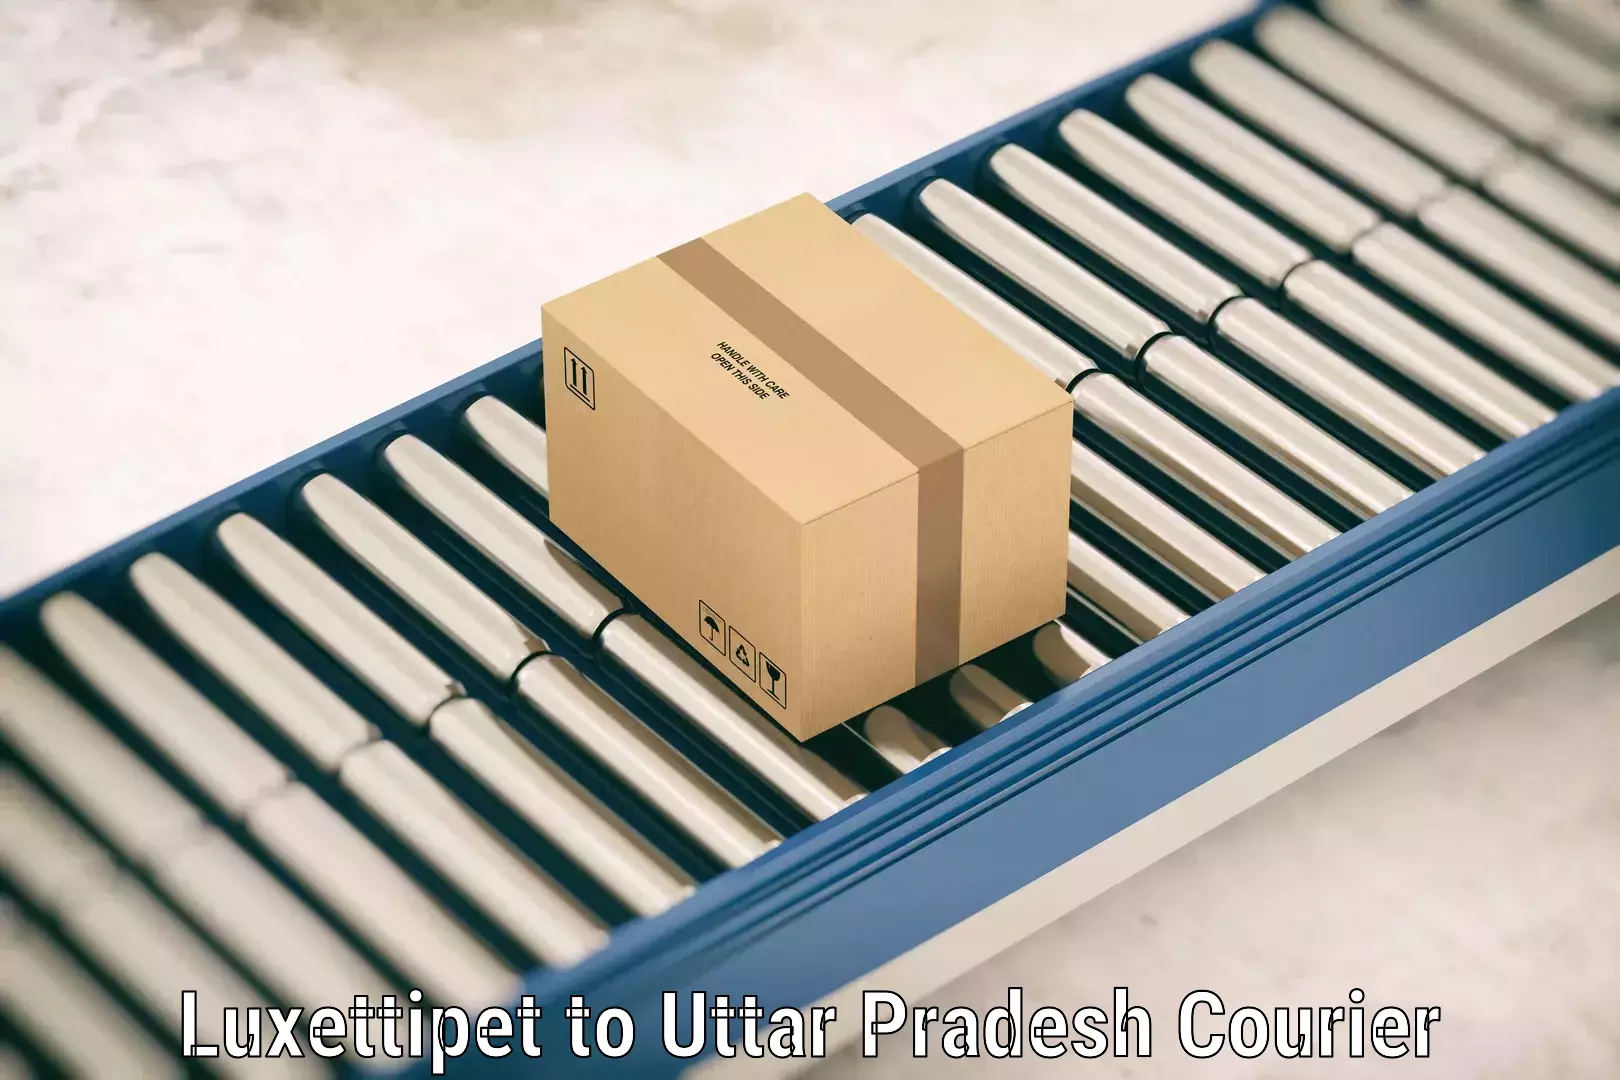 Overnight baggage shipping in Luxettipet to Uttar Pradesh